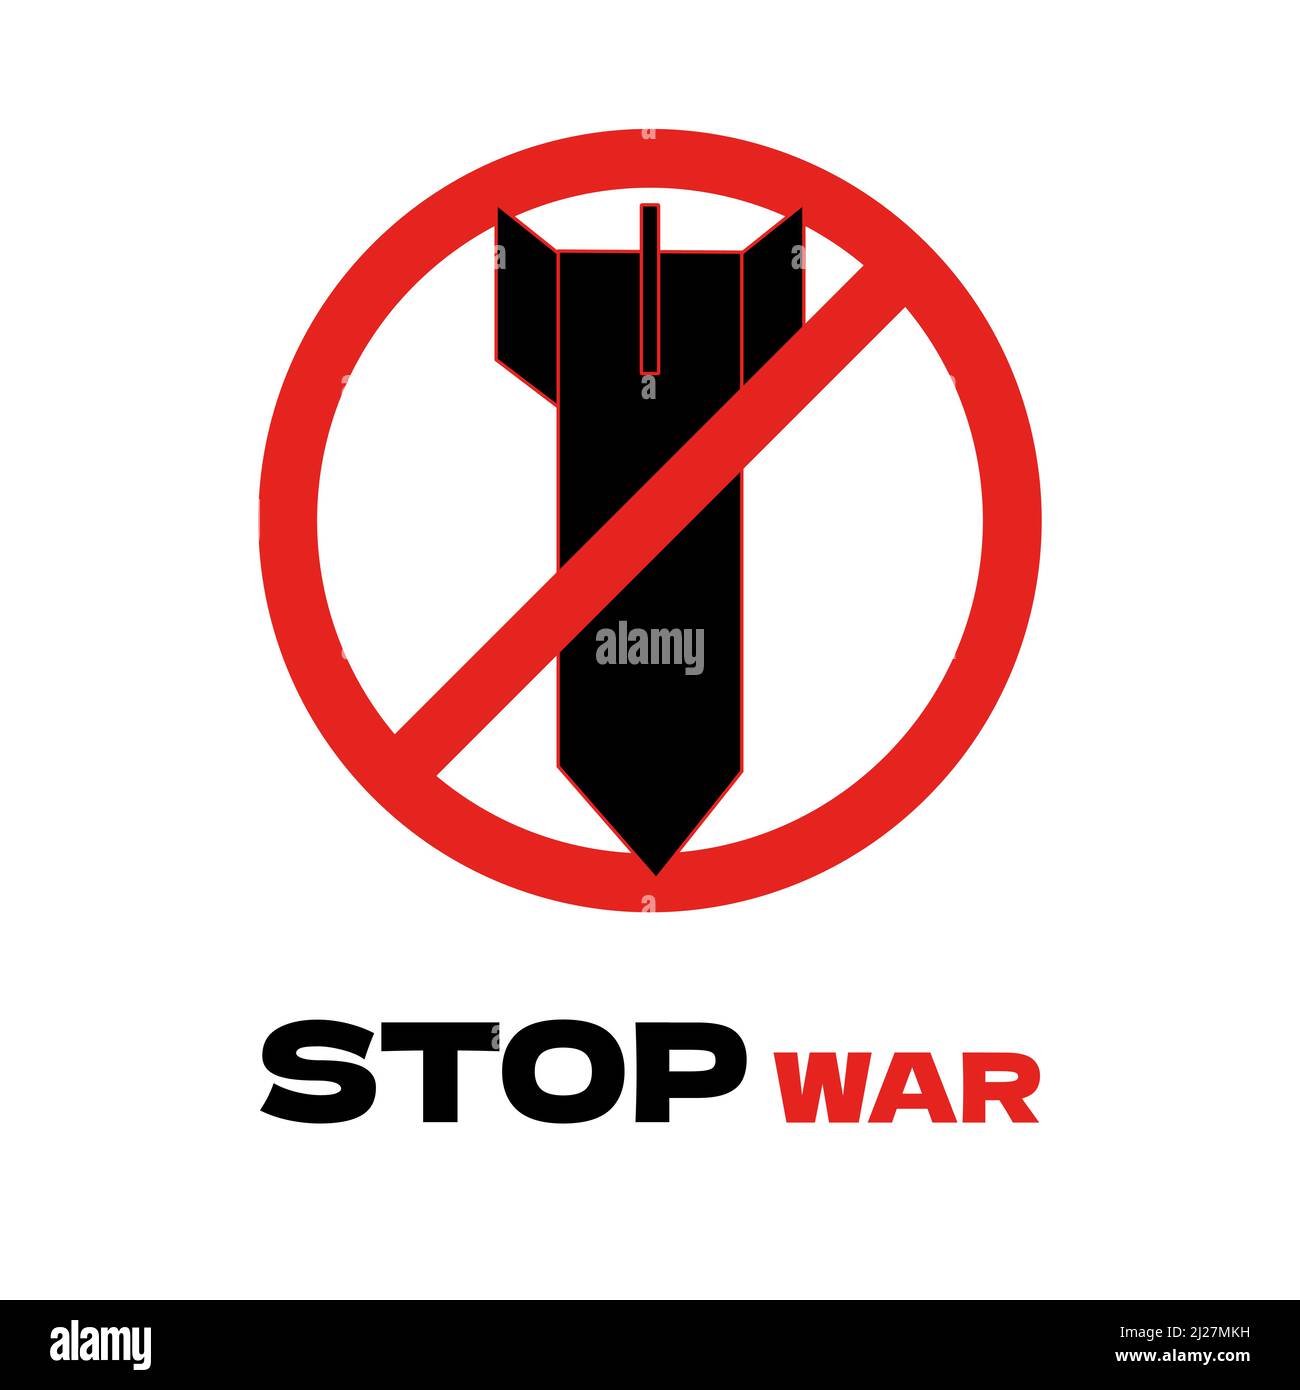 Stop war designs with missile weaponry inside prohibition sign. Minimalistic poster agains war. Stop war start disarmament vector illustration Stock Vector